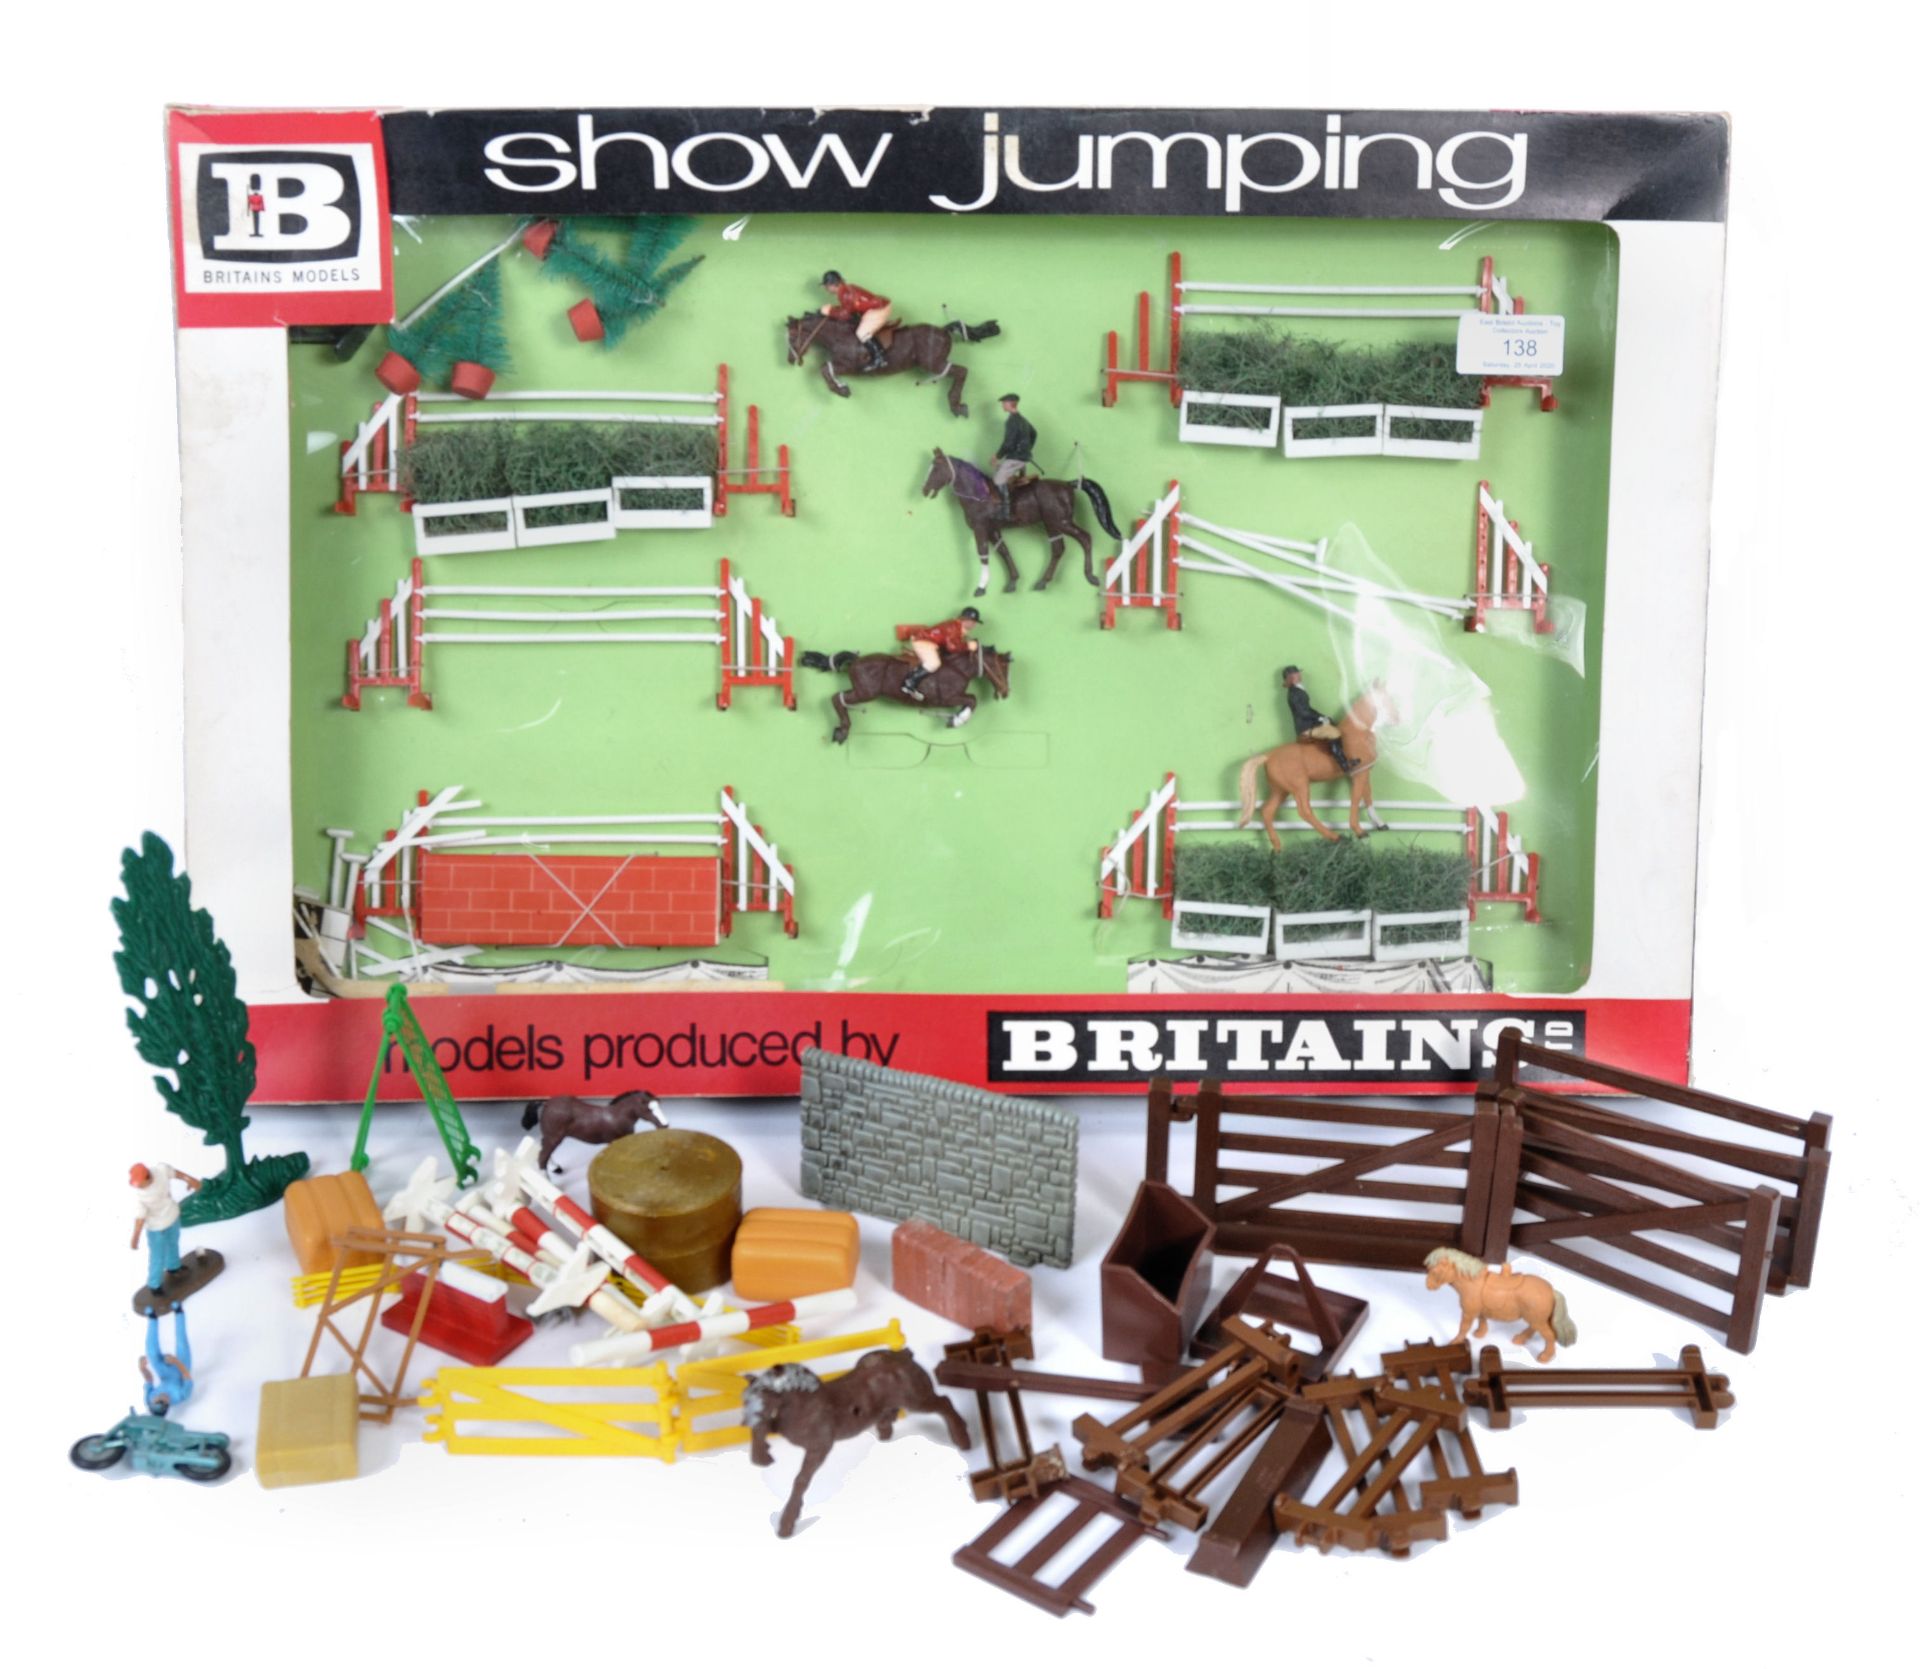 COLLECTION OF BRITAIN'S SHOW JUMPING FIGURES